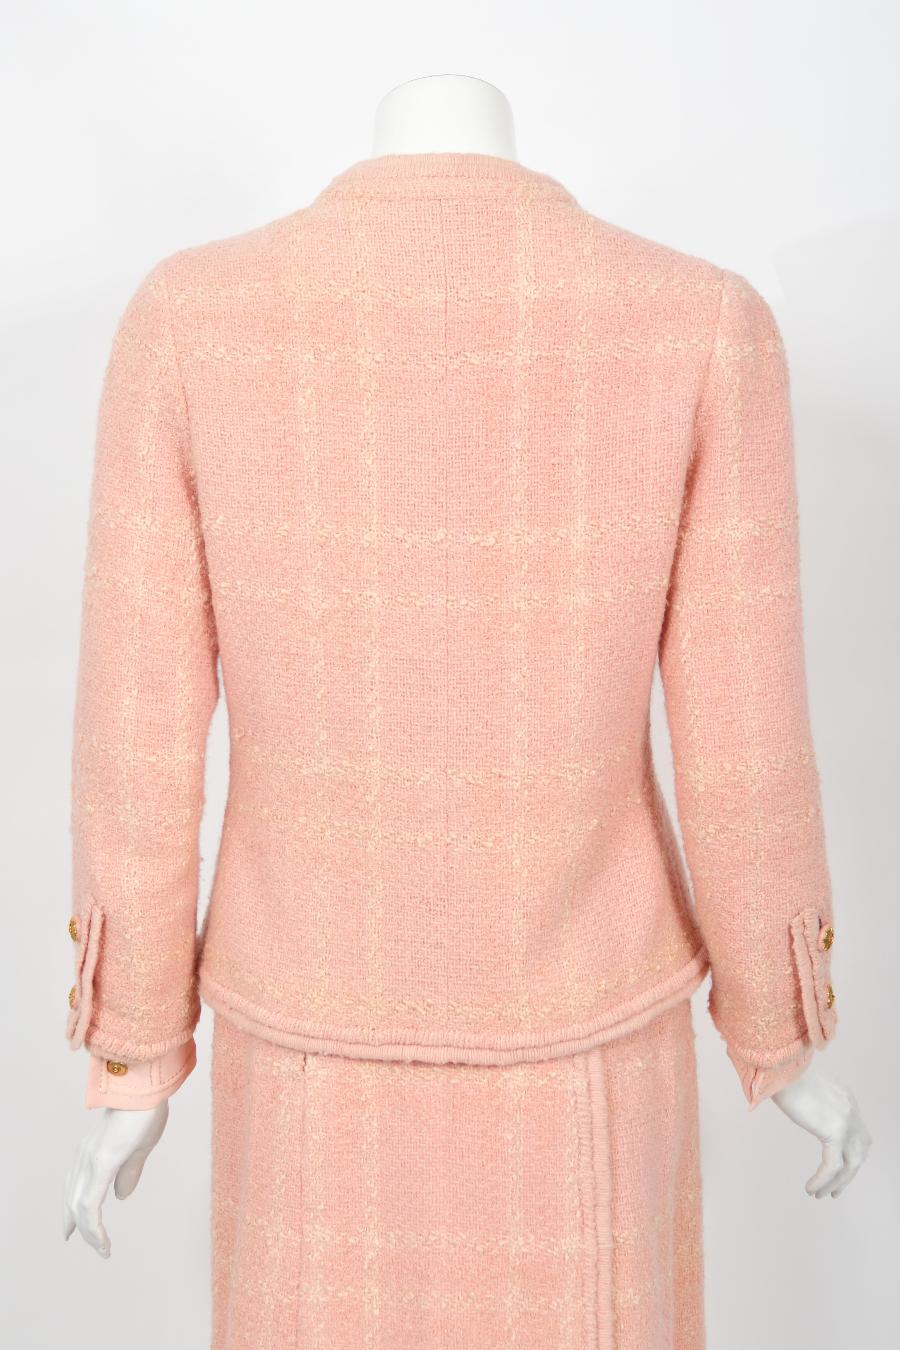 Vintage 1973 Chanel Haute Couture Documented Pink Wool Jacket Blouse Skirt Suit For Sale 13